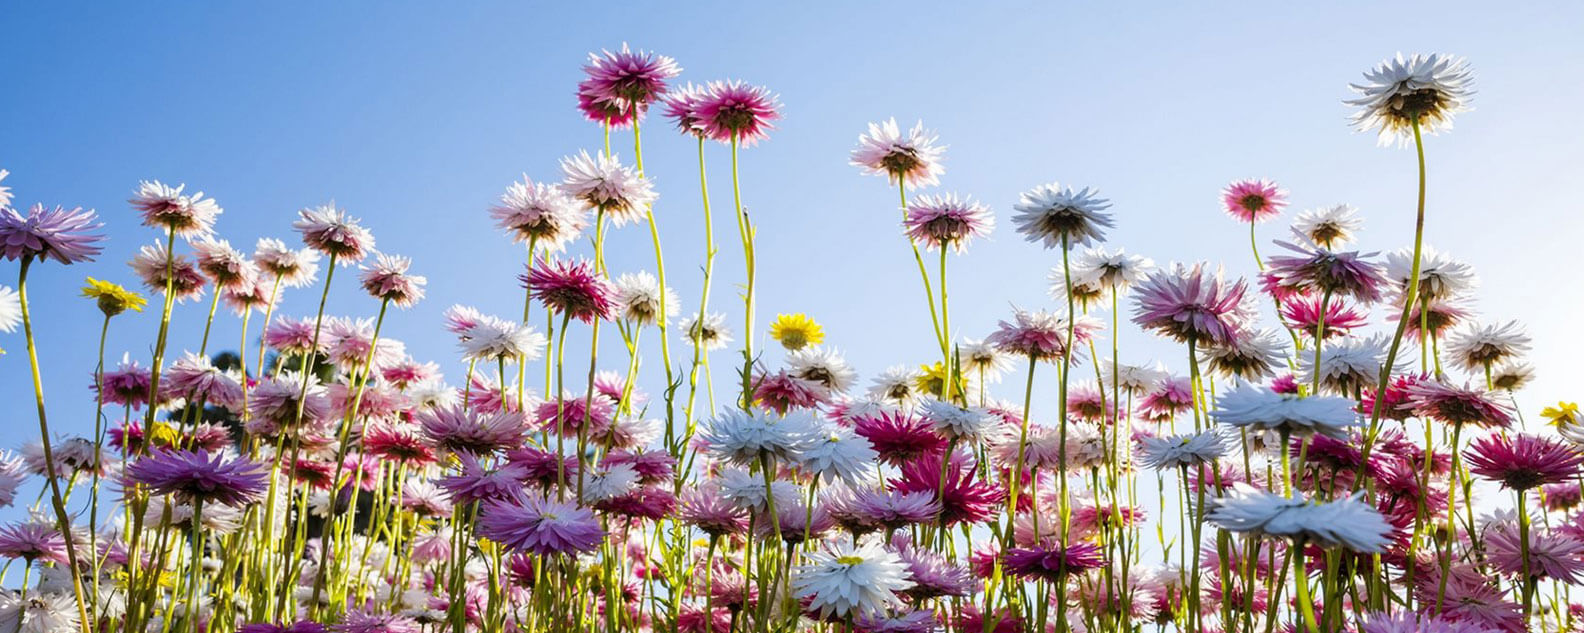 Pink Shades Paper Daisy Seeds